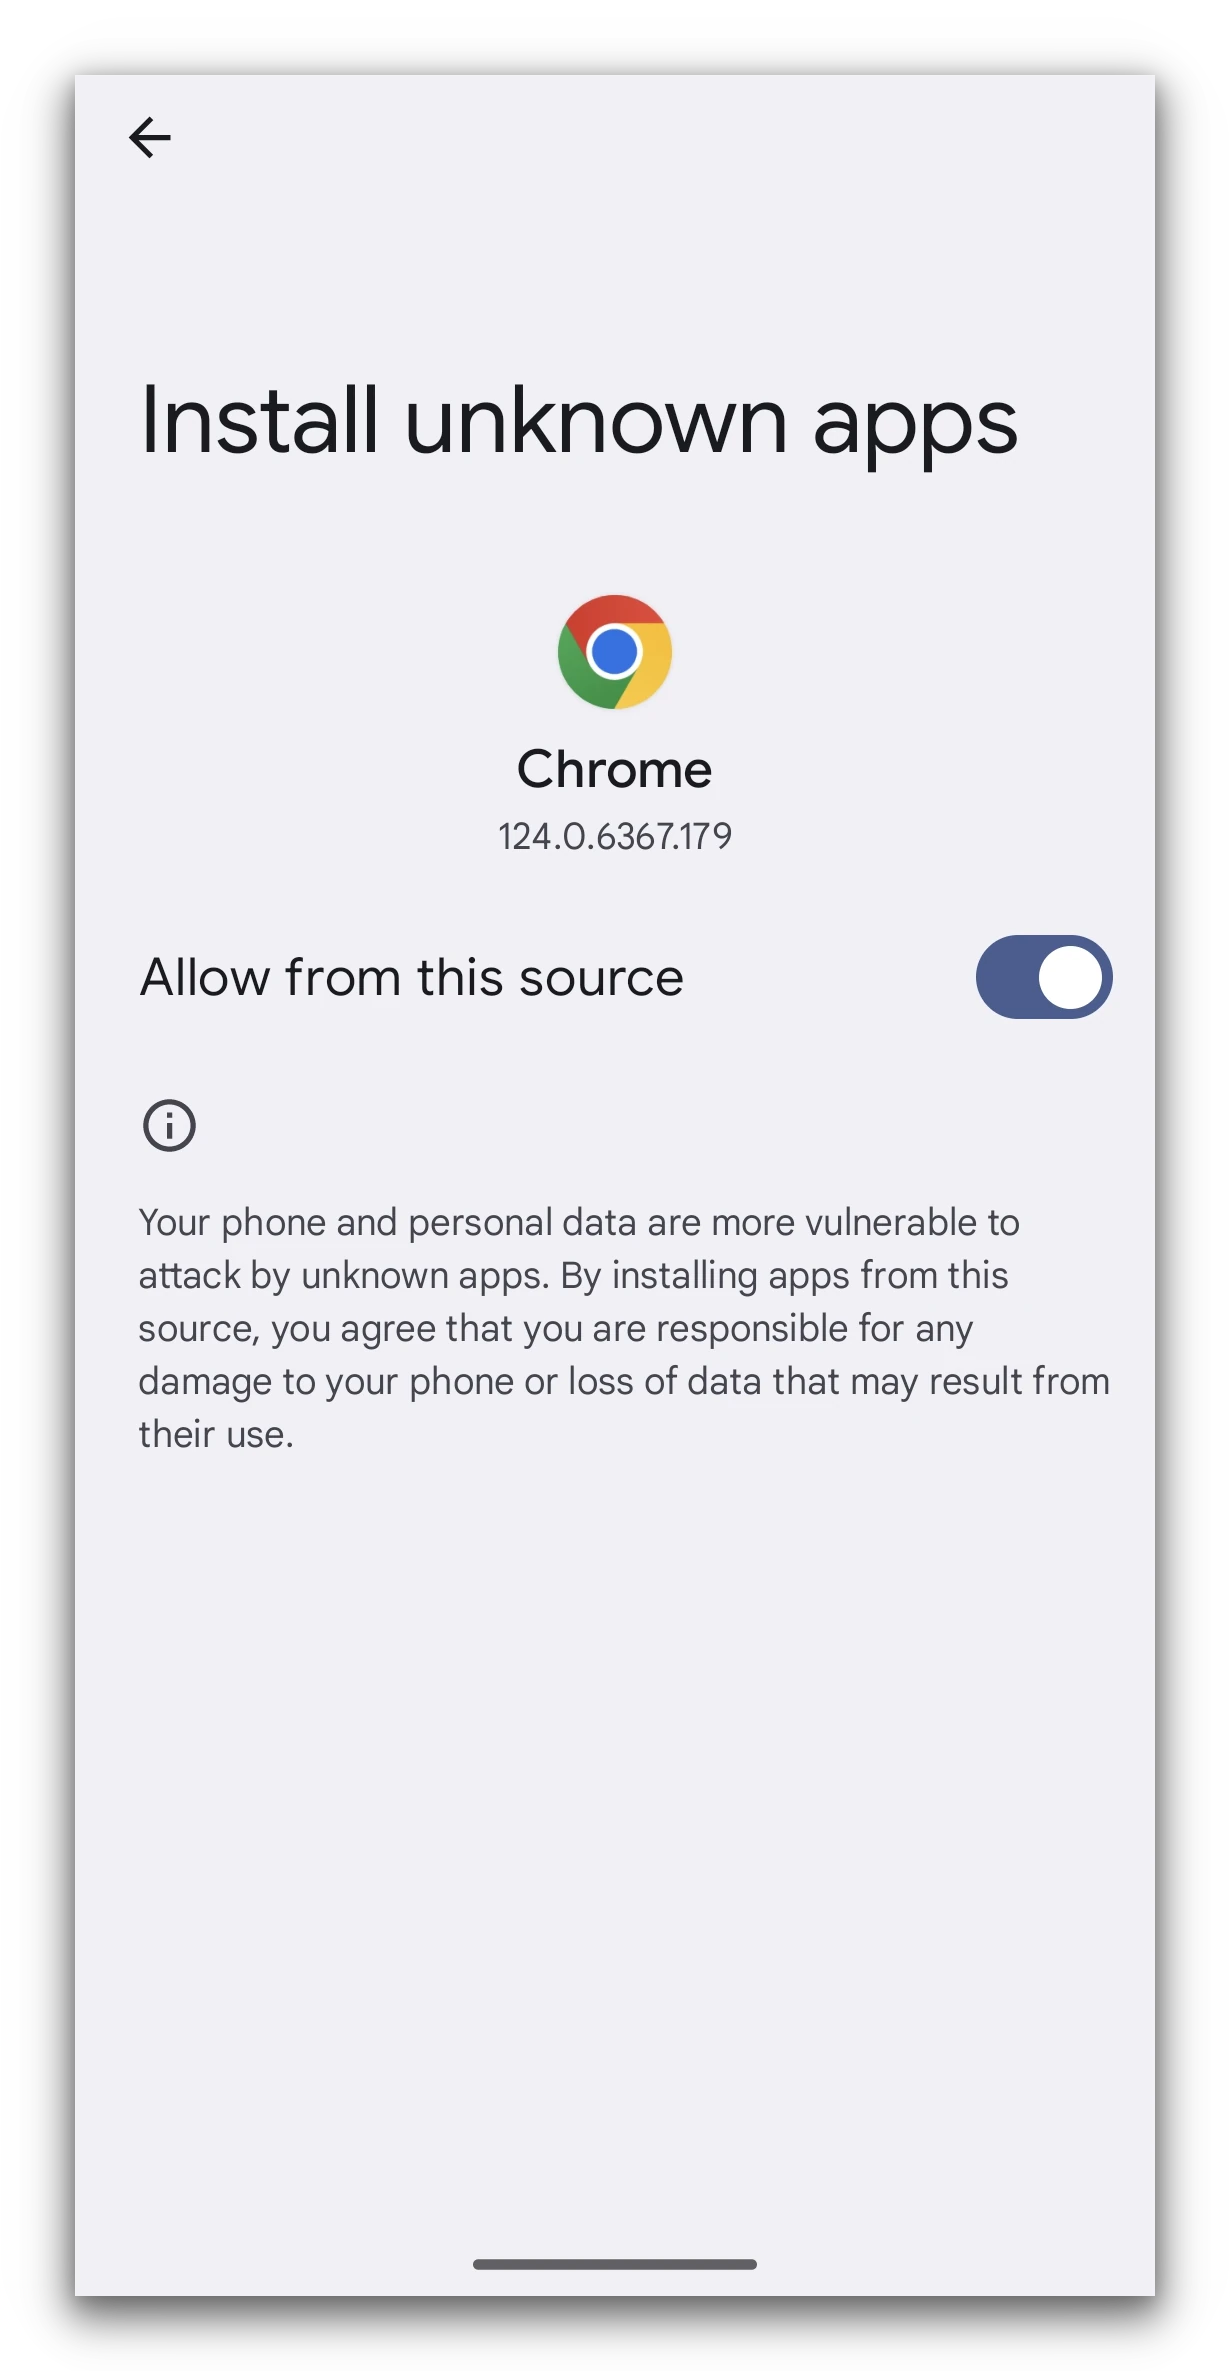 Android settings for installing unknown apps